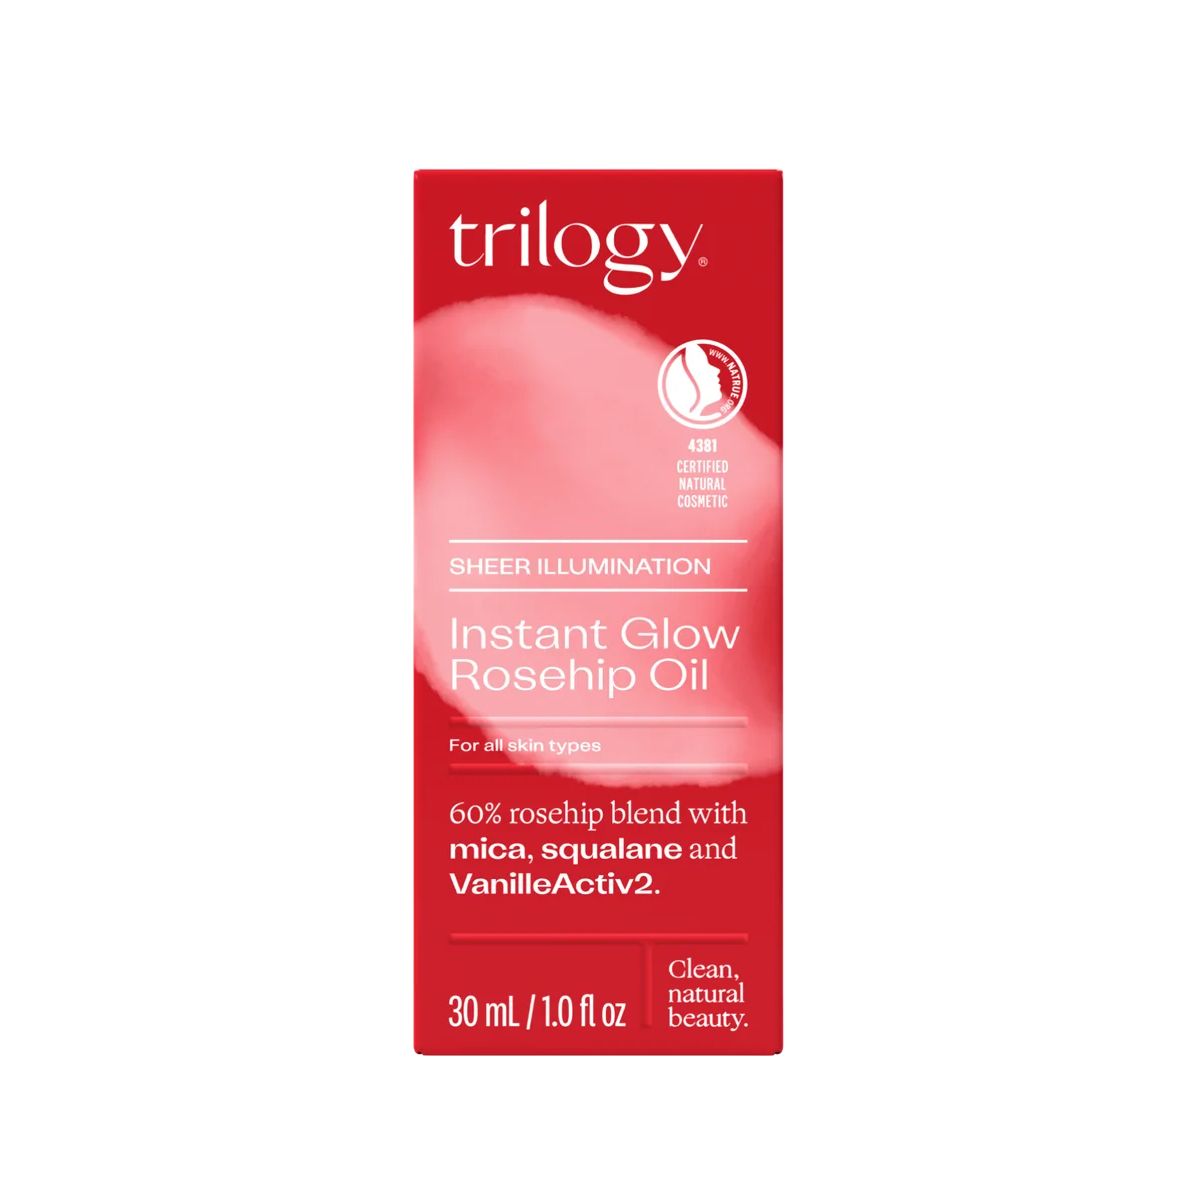 Trilogy Instant Glow Rosehip Oil 30ml – product in box